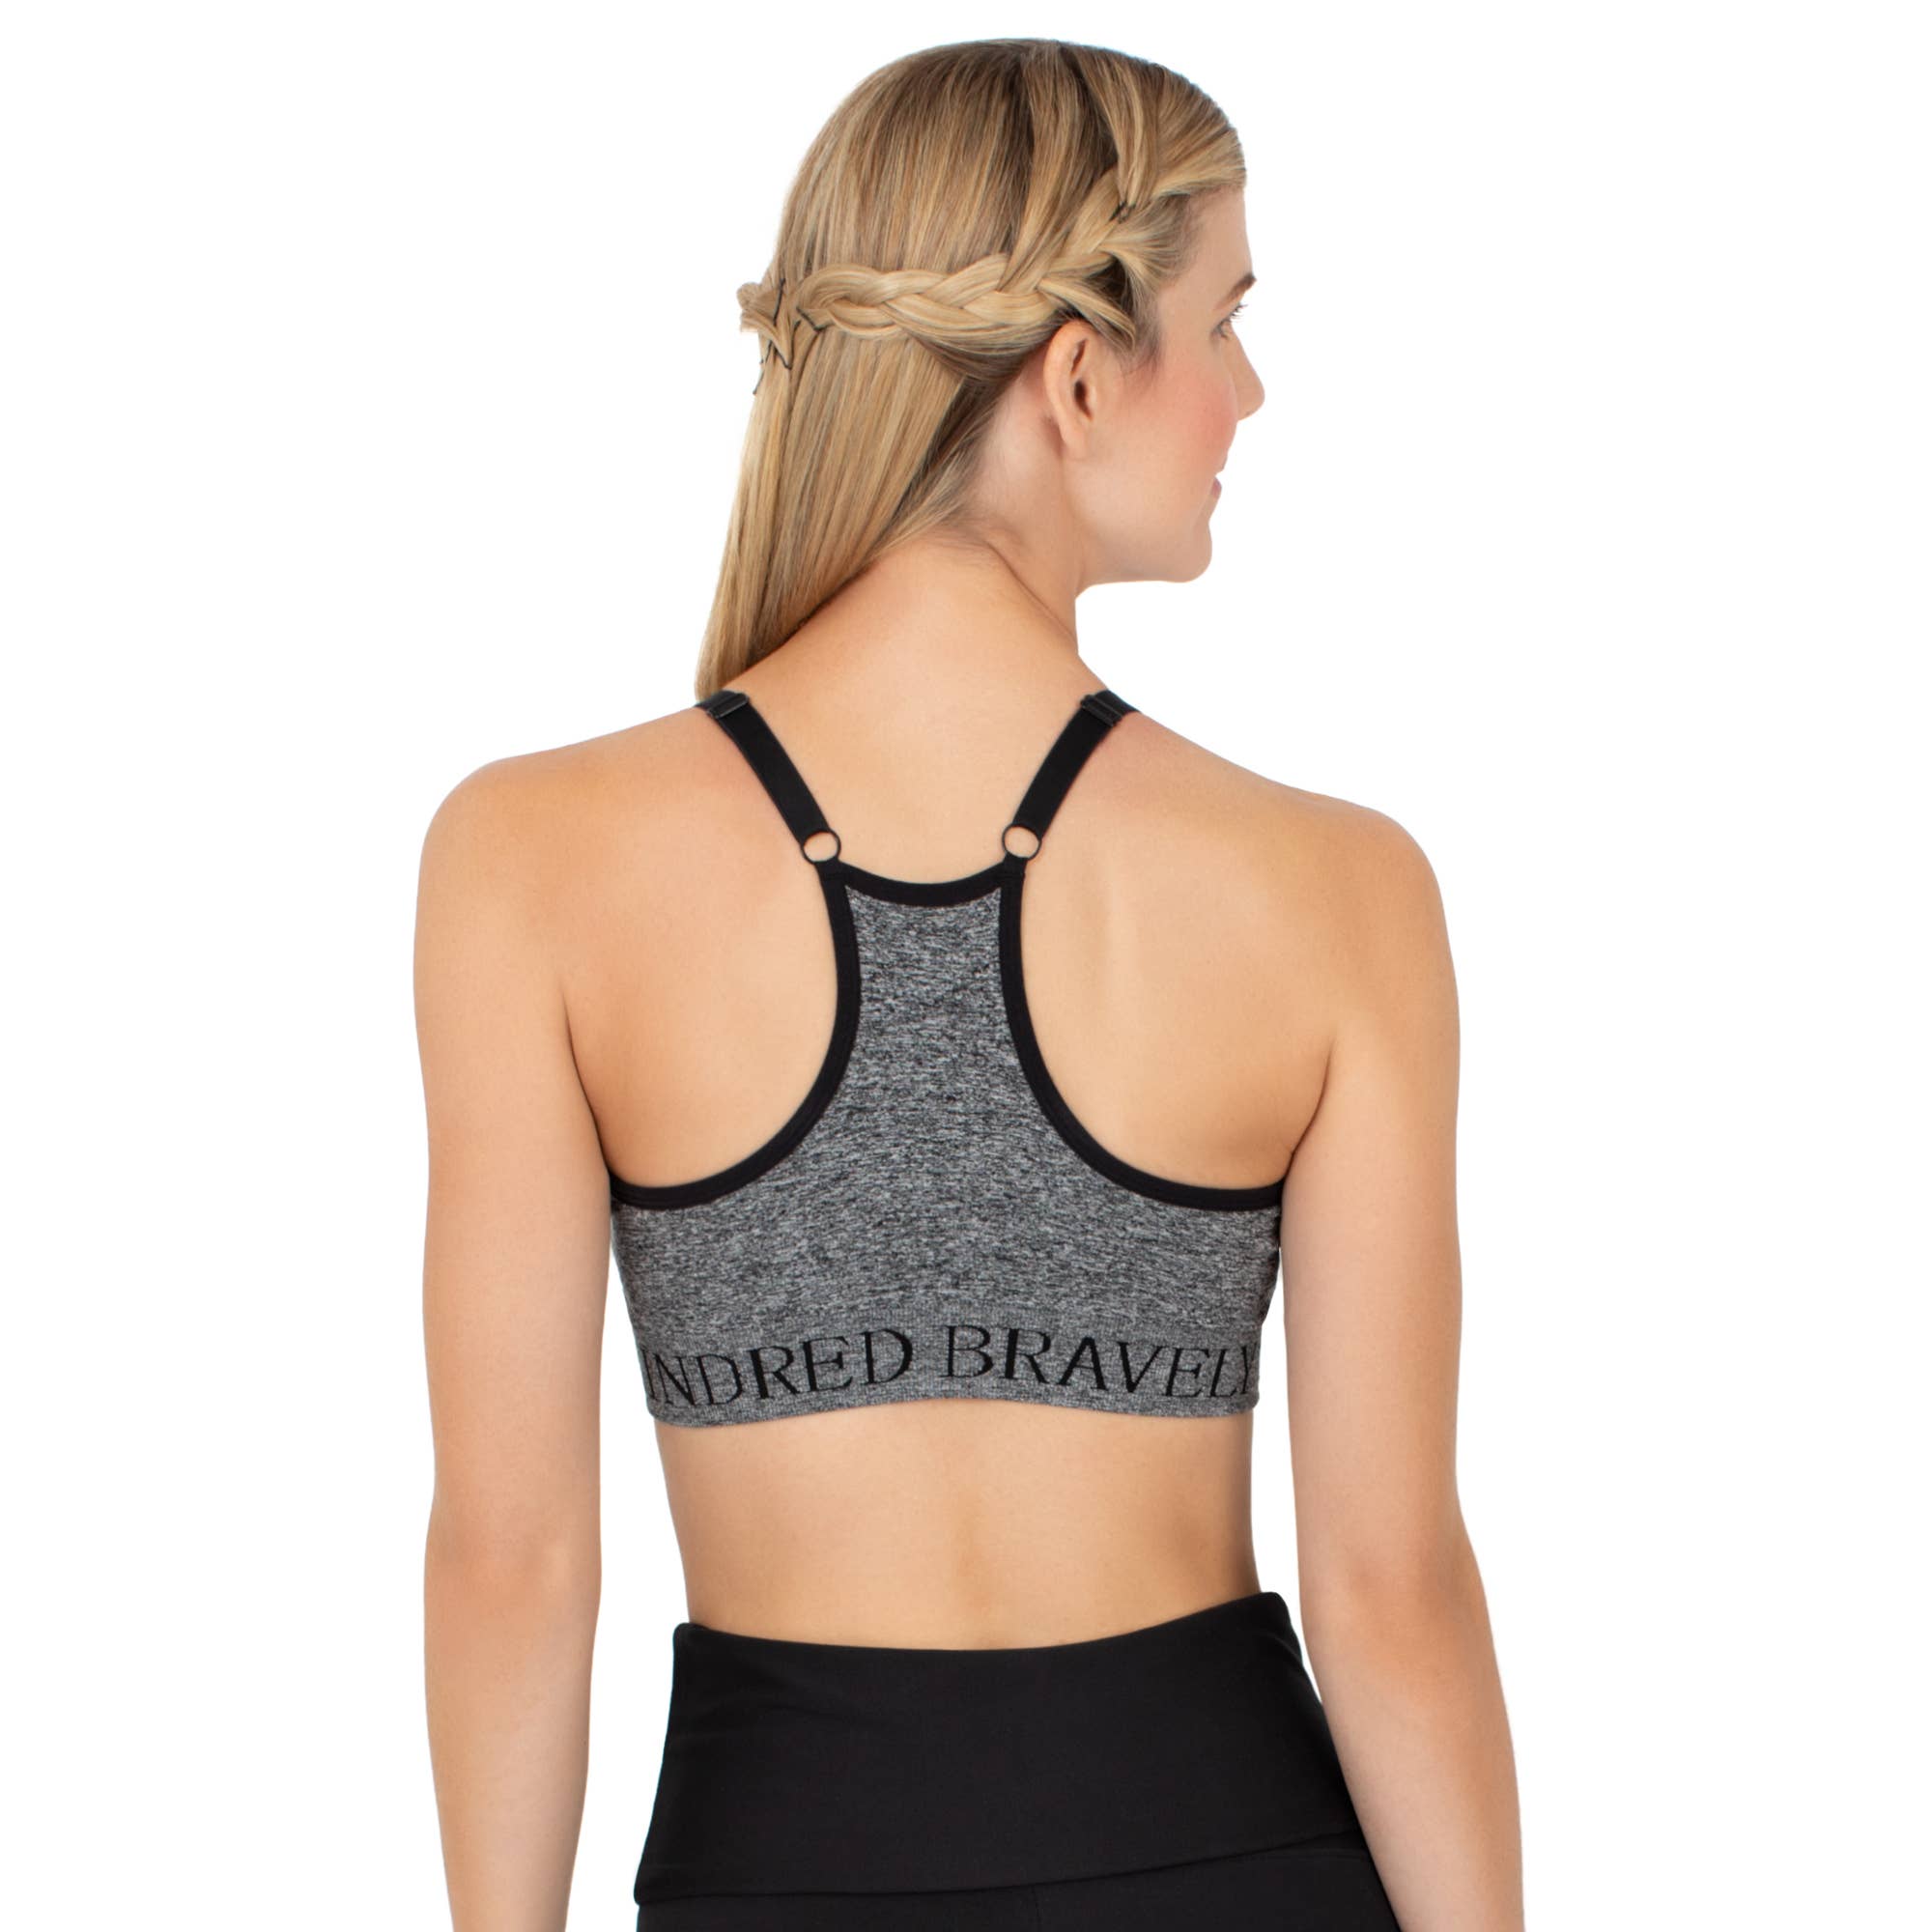 Kindred Bravely - Sublime Support Low Impact Nursing & Maternity Sports Bra- Grey